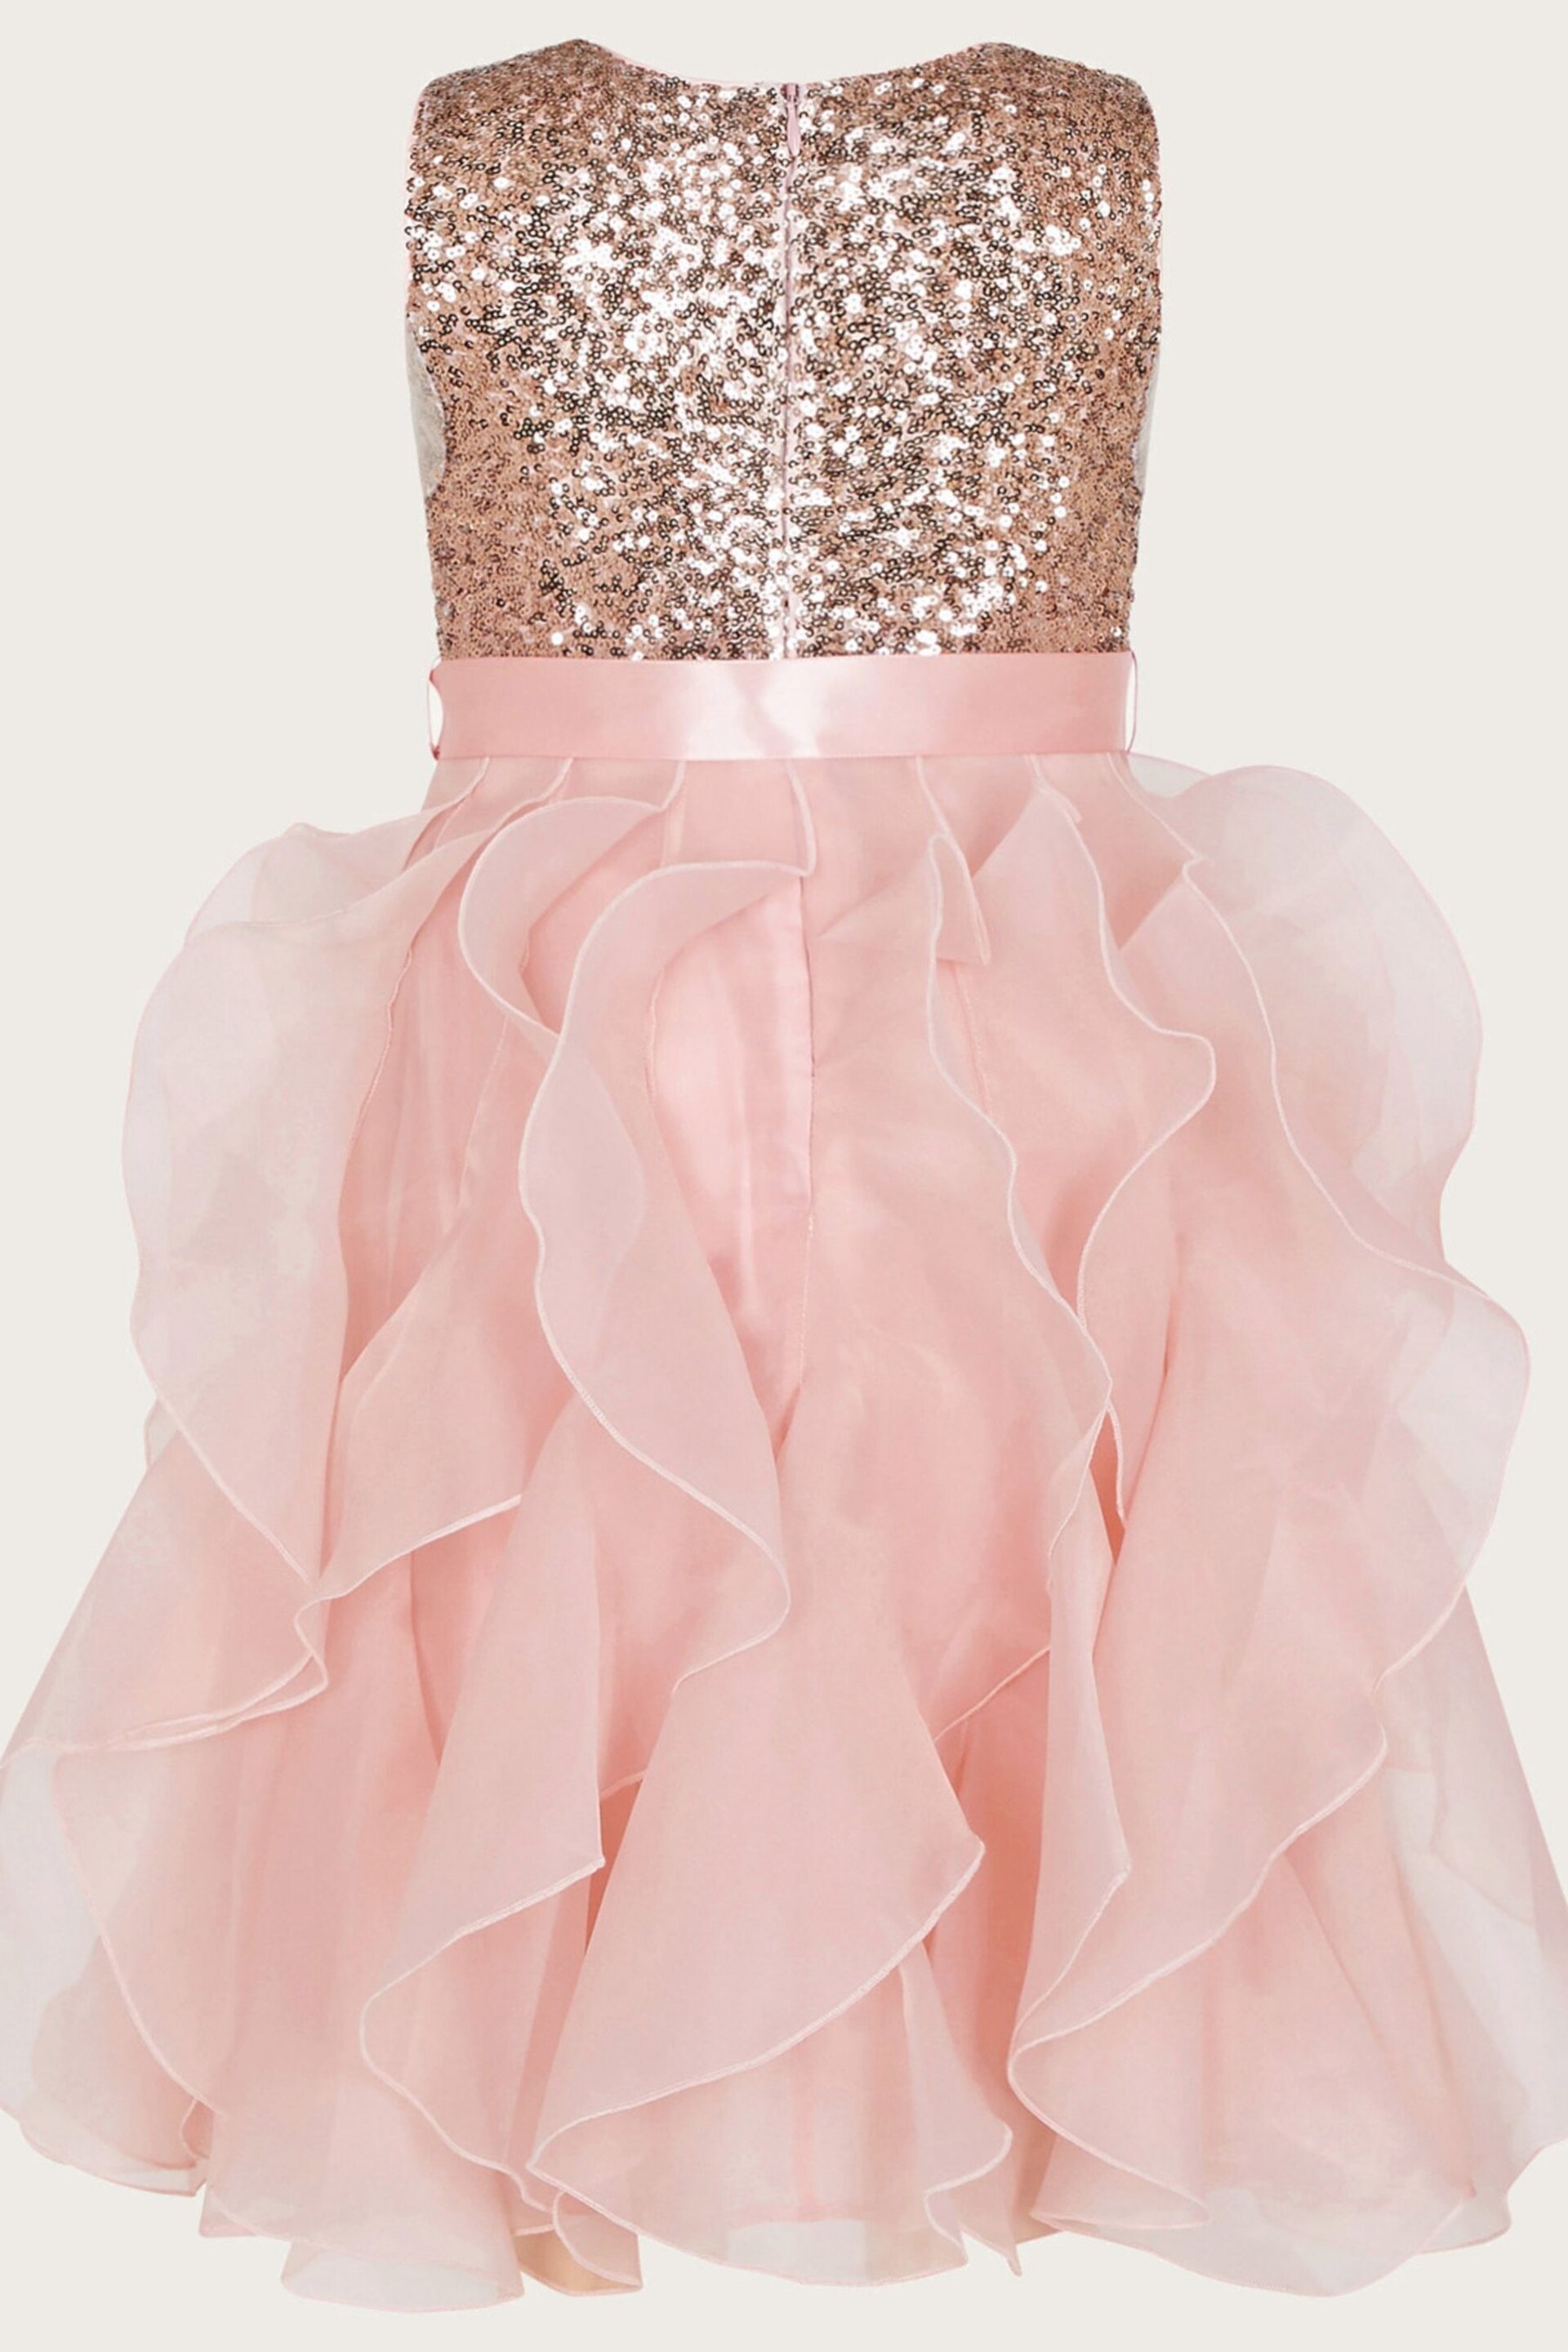 Monsoon Pink Sequin Ruffle Cancan Dress - Image 4 of 5